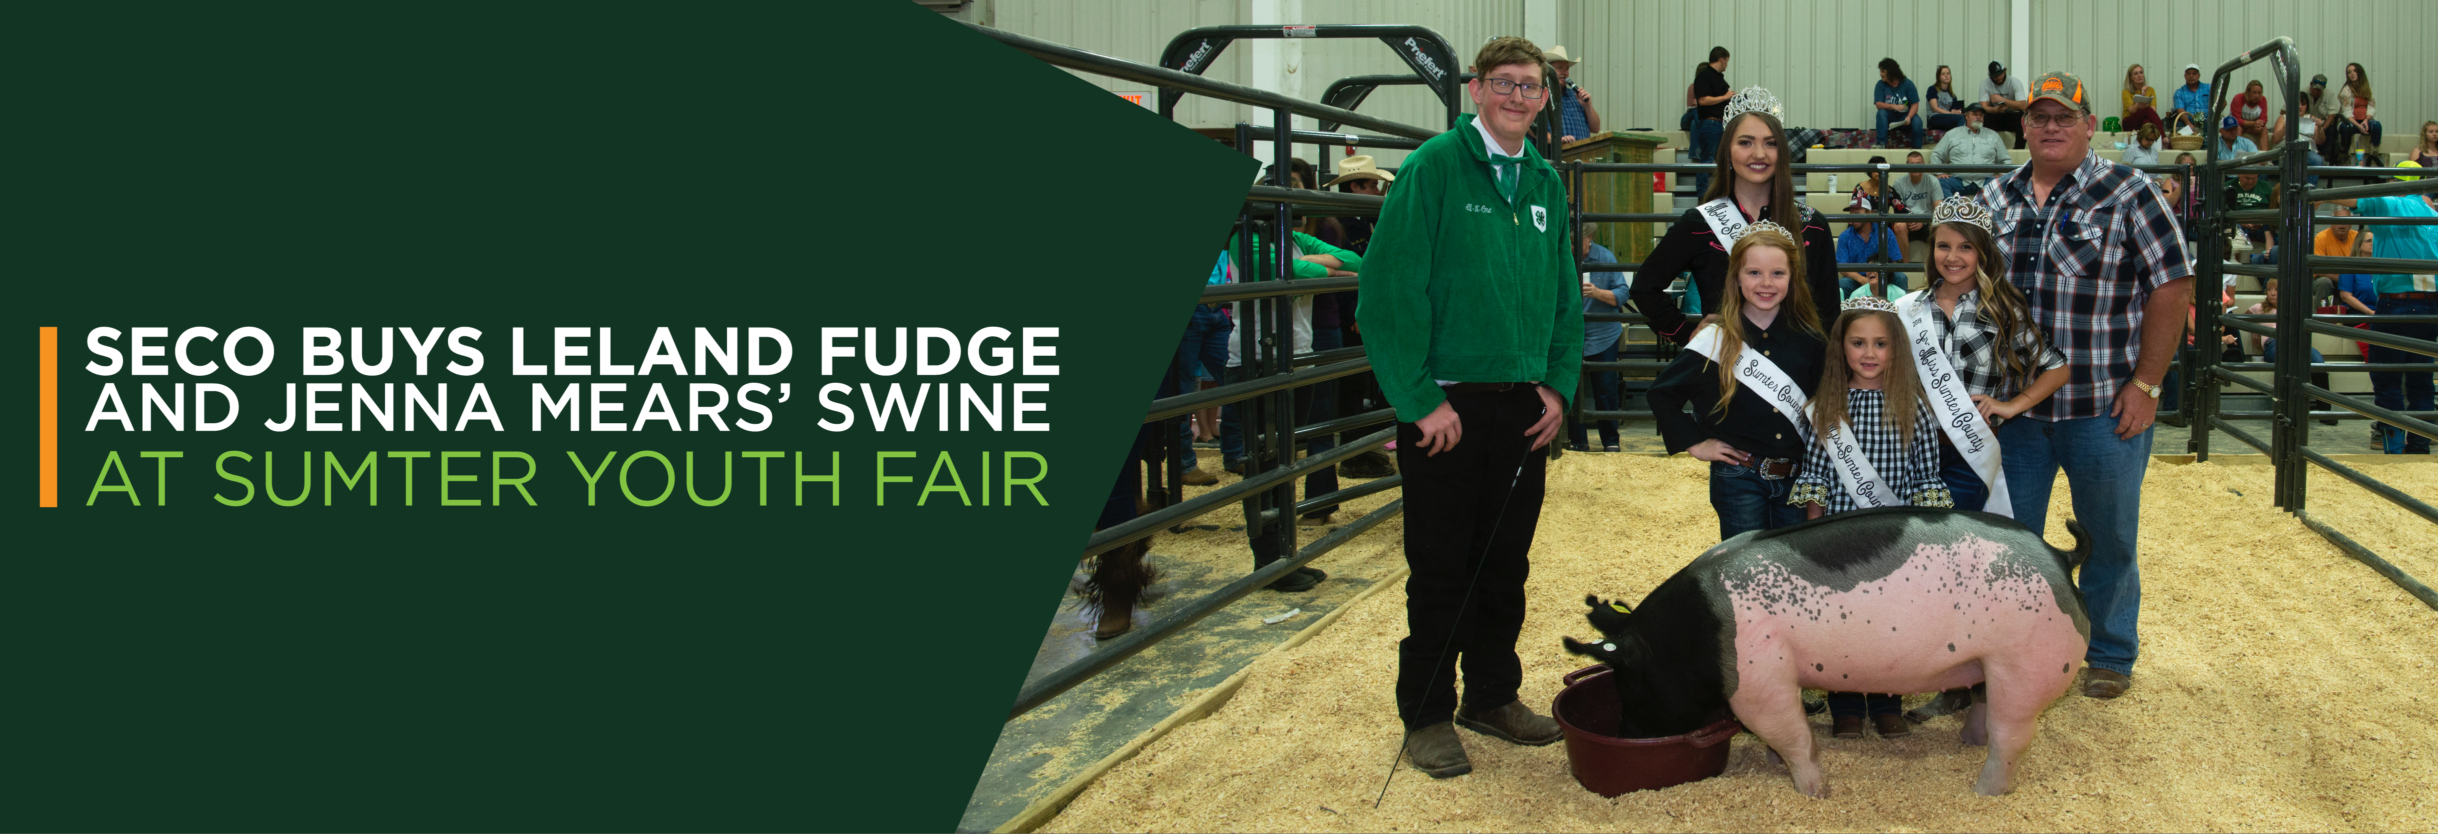 SECO Buys Leland Fudge and Jenna Mears’ Swine at Sumter Youth Fair